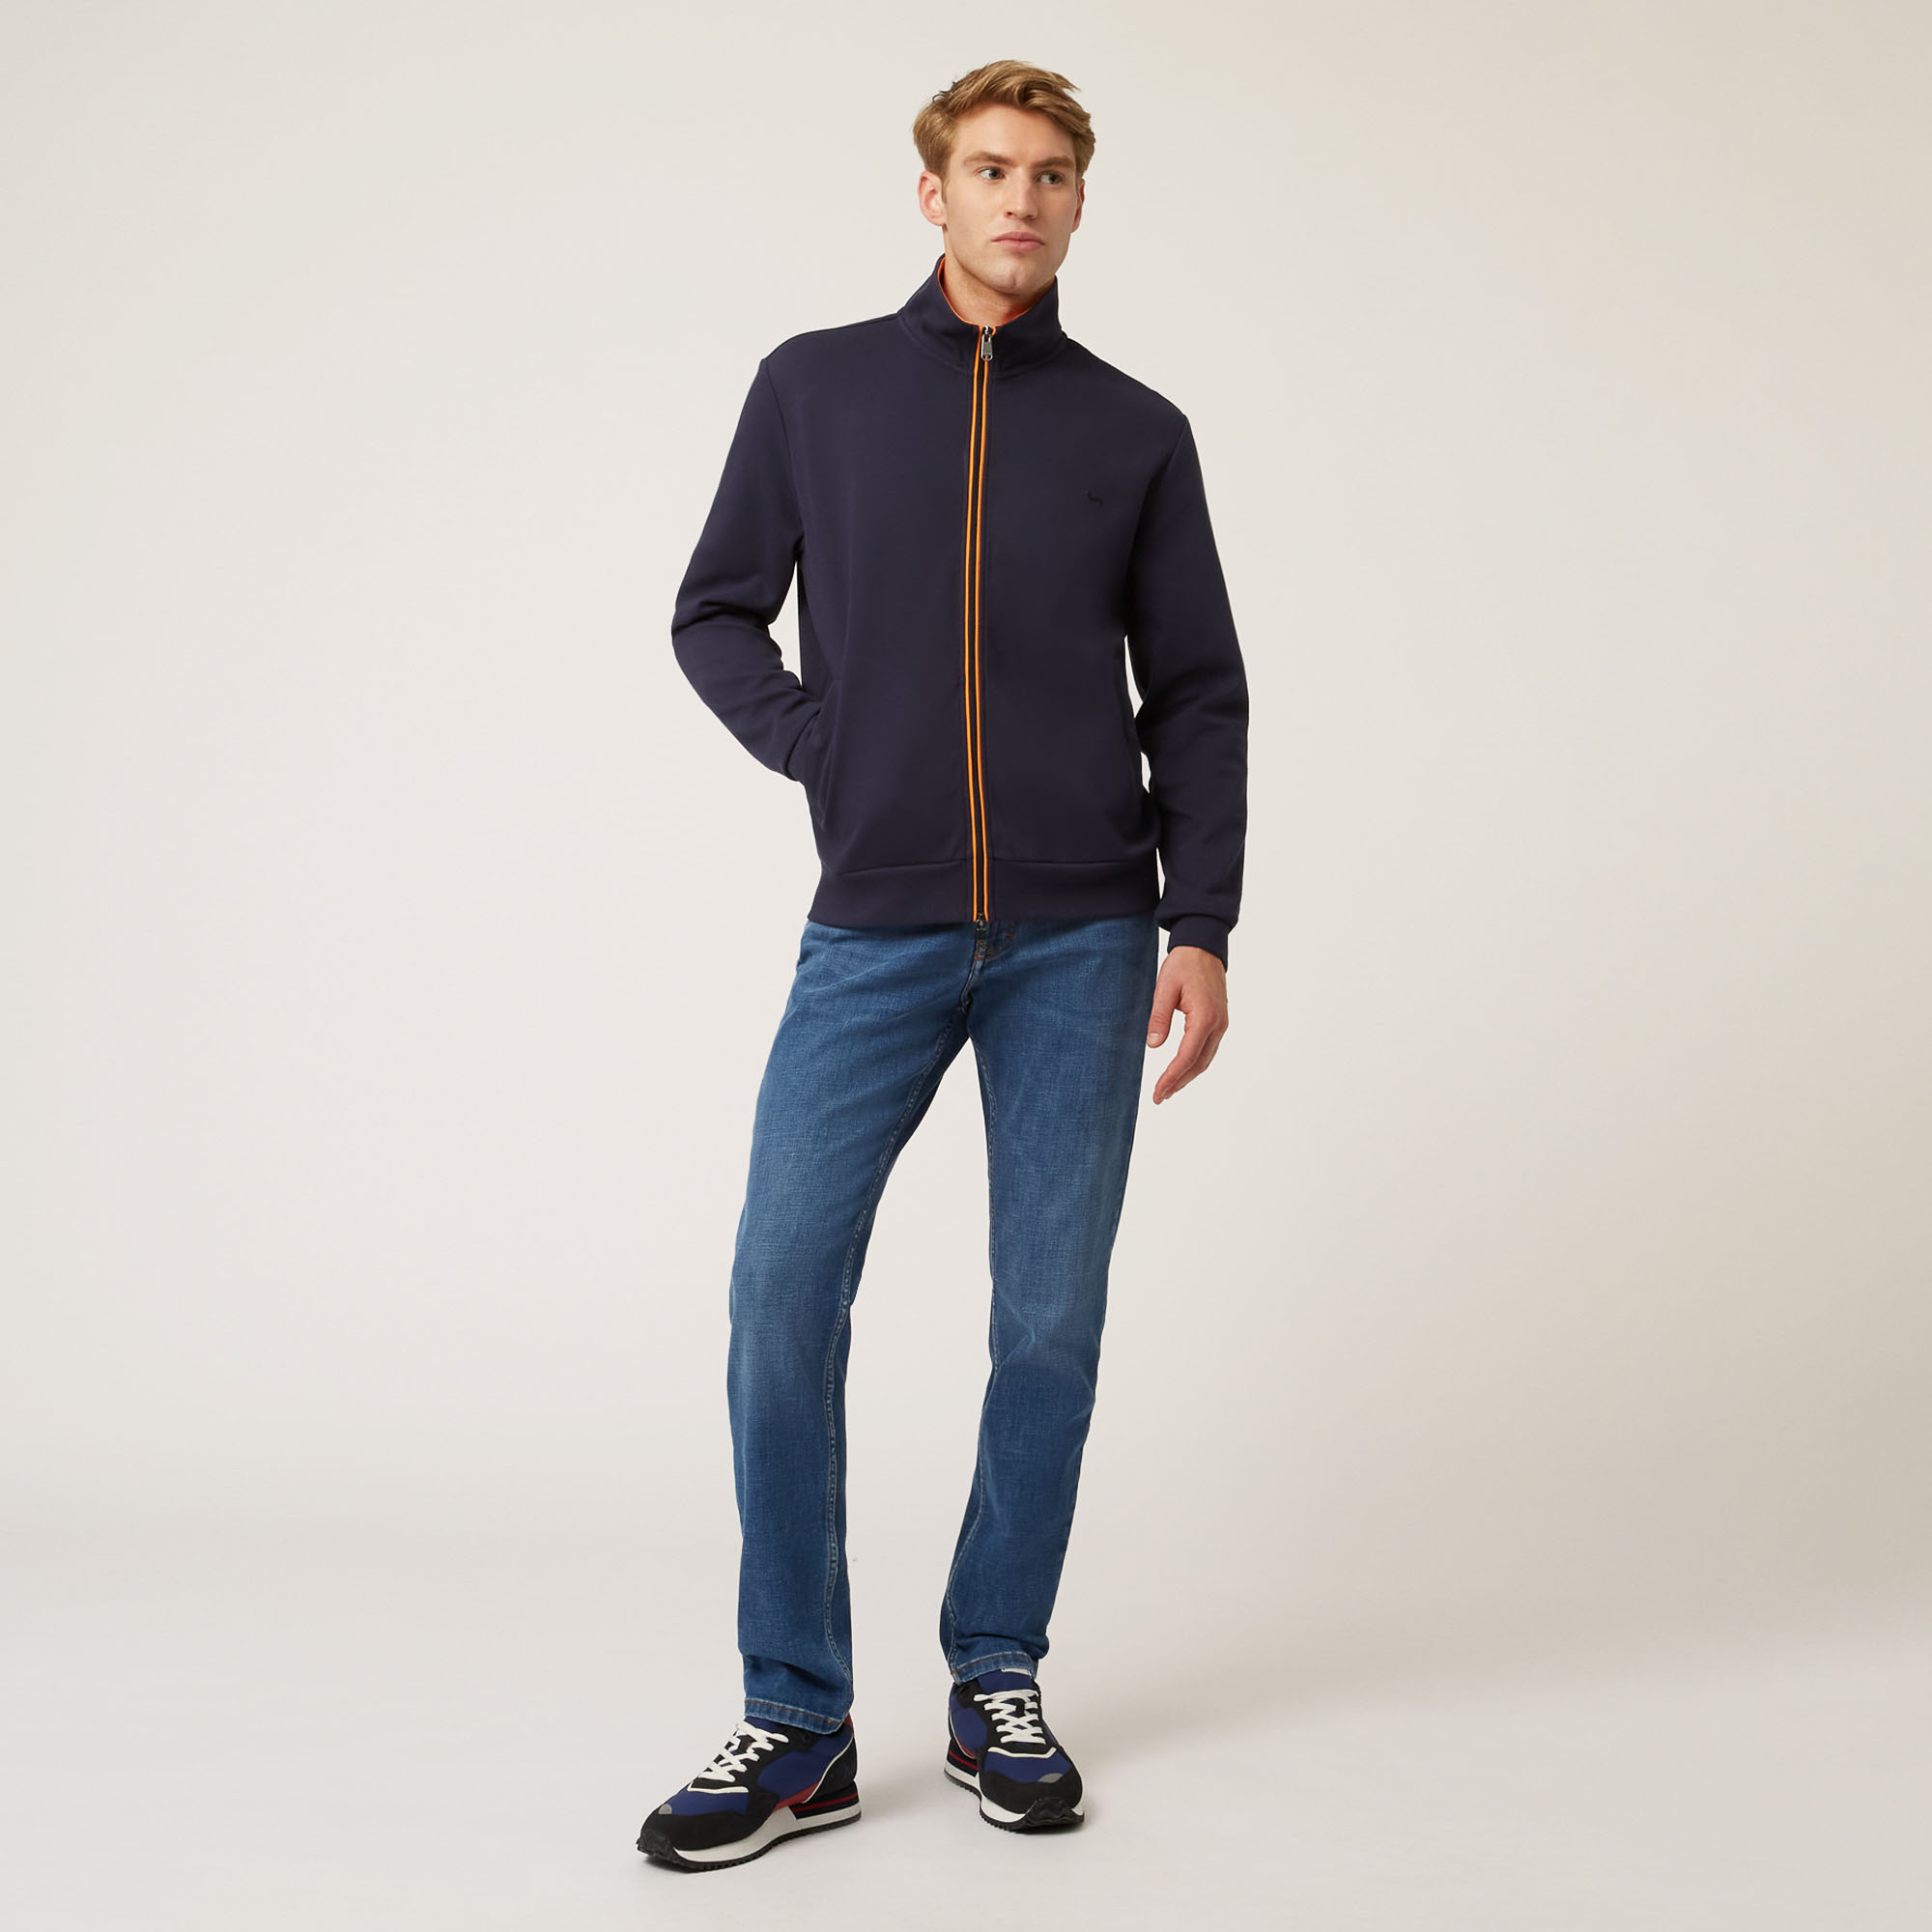 Full-Zip Sweatshirt With Contrasting Piping, Blue, large image number 3